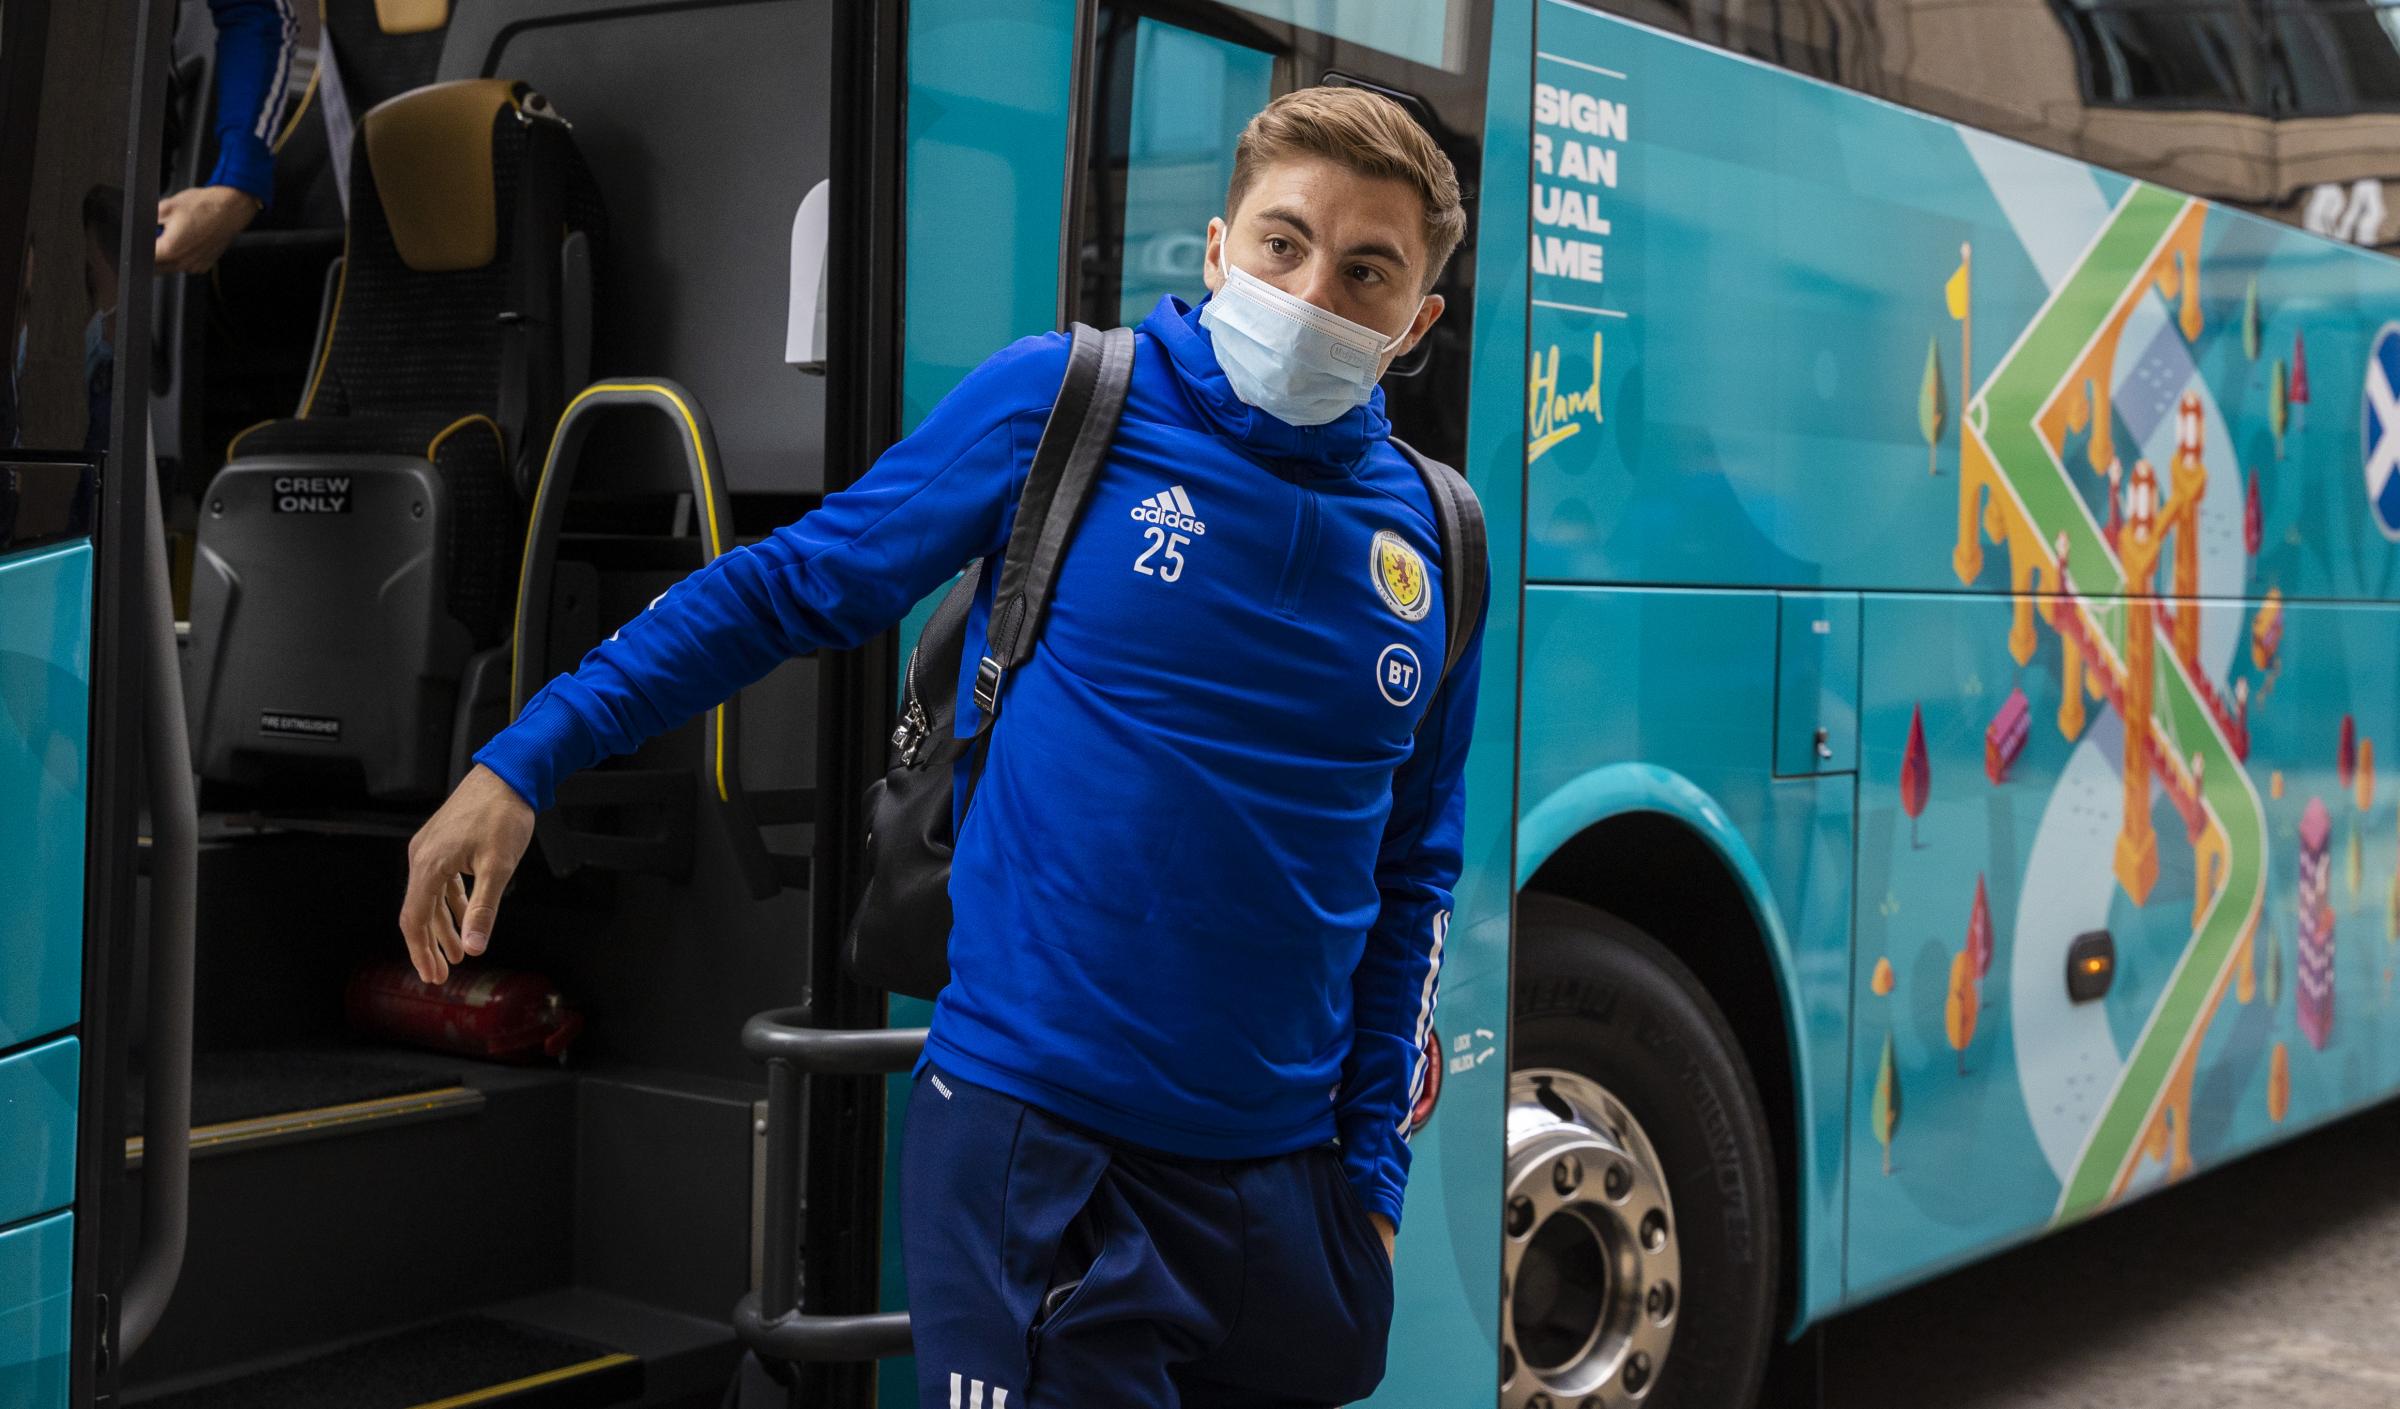 James Forrest a major doubt for Celtic's massive Champions League qualifier after being forced to self-isolate